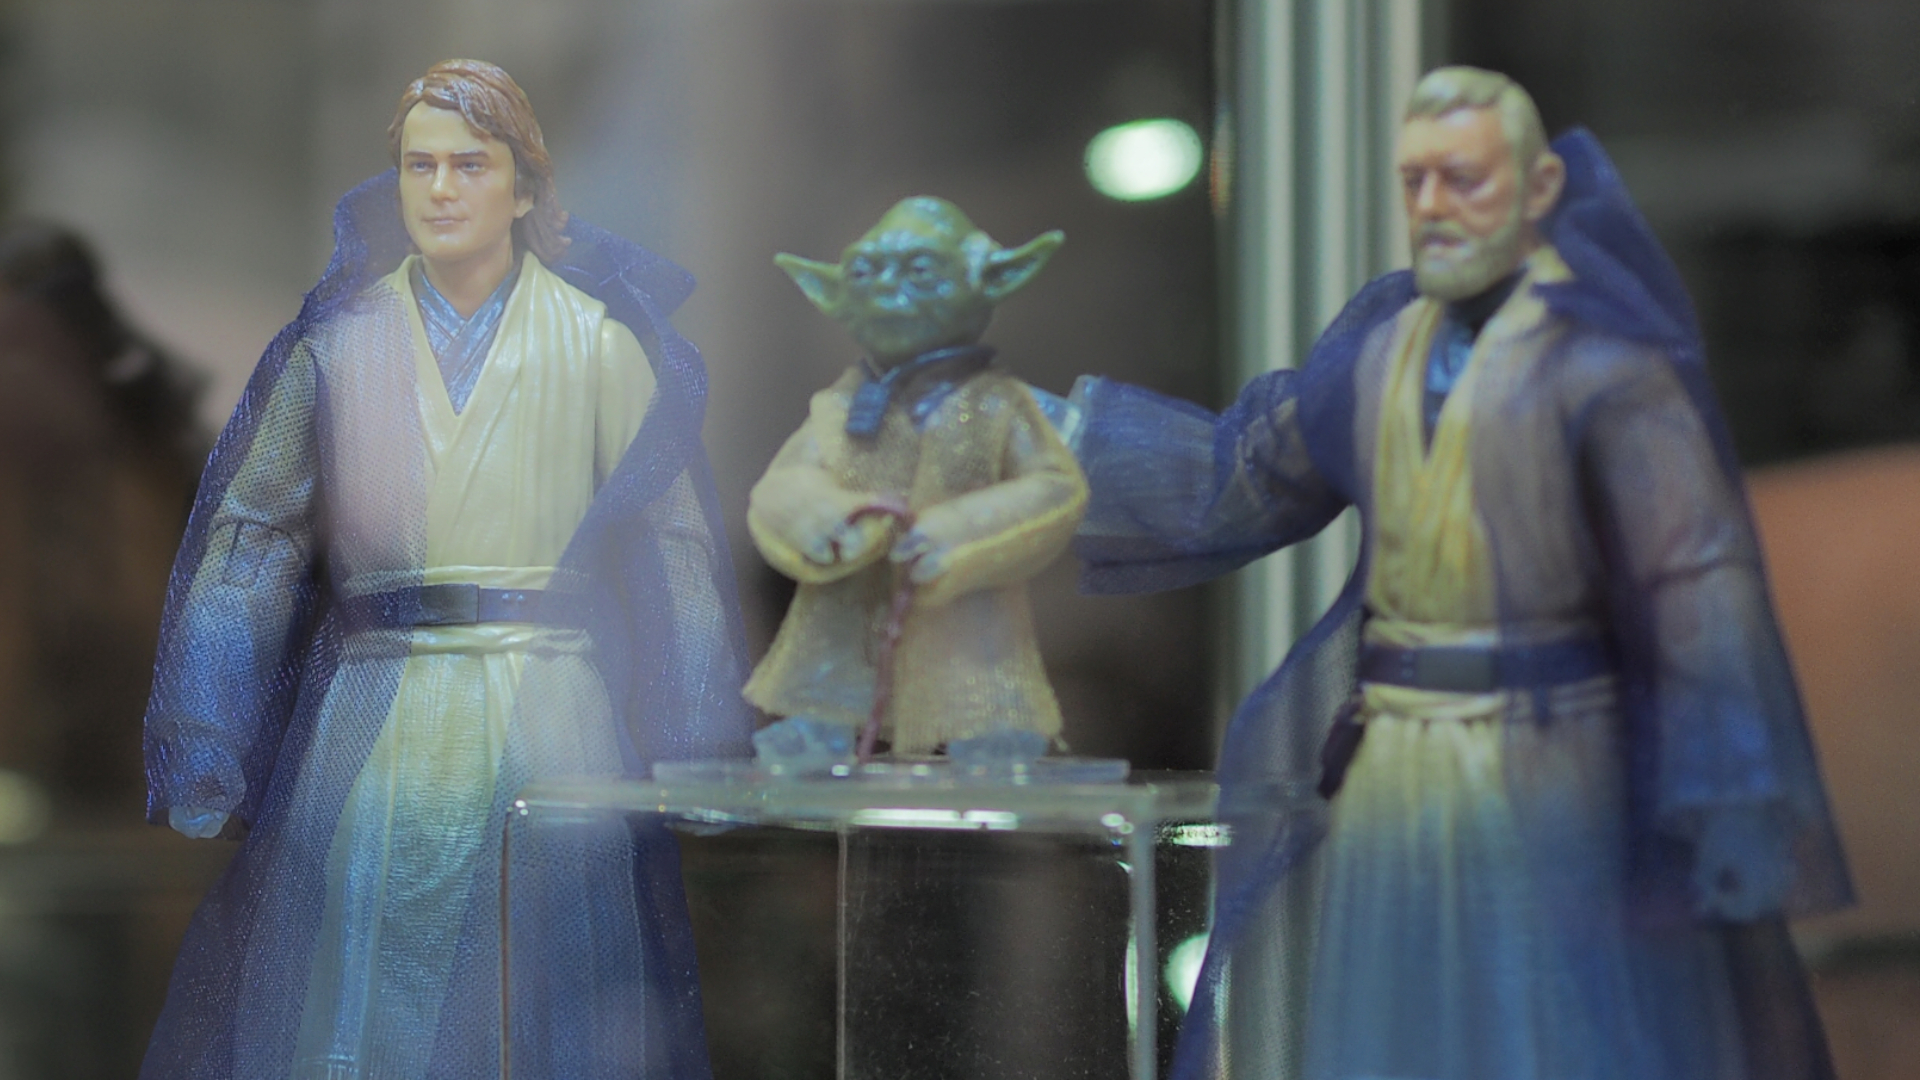 Force Ghost action figures of Anakin, Yoda, and Obi-Wan look on